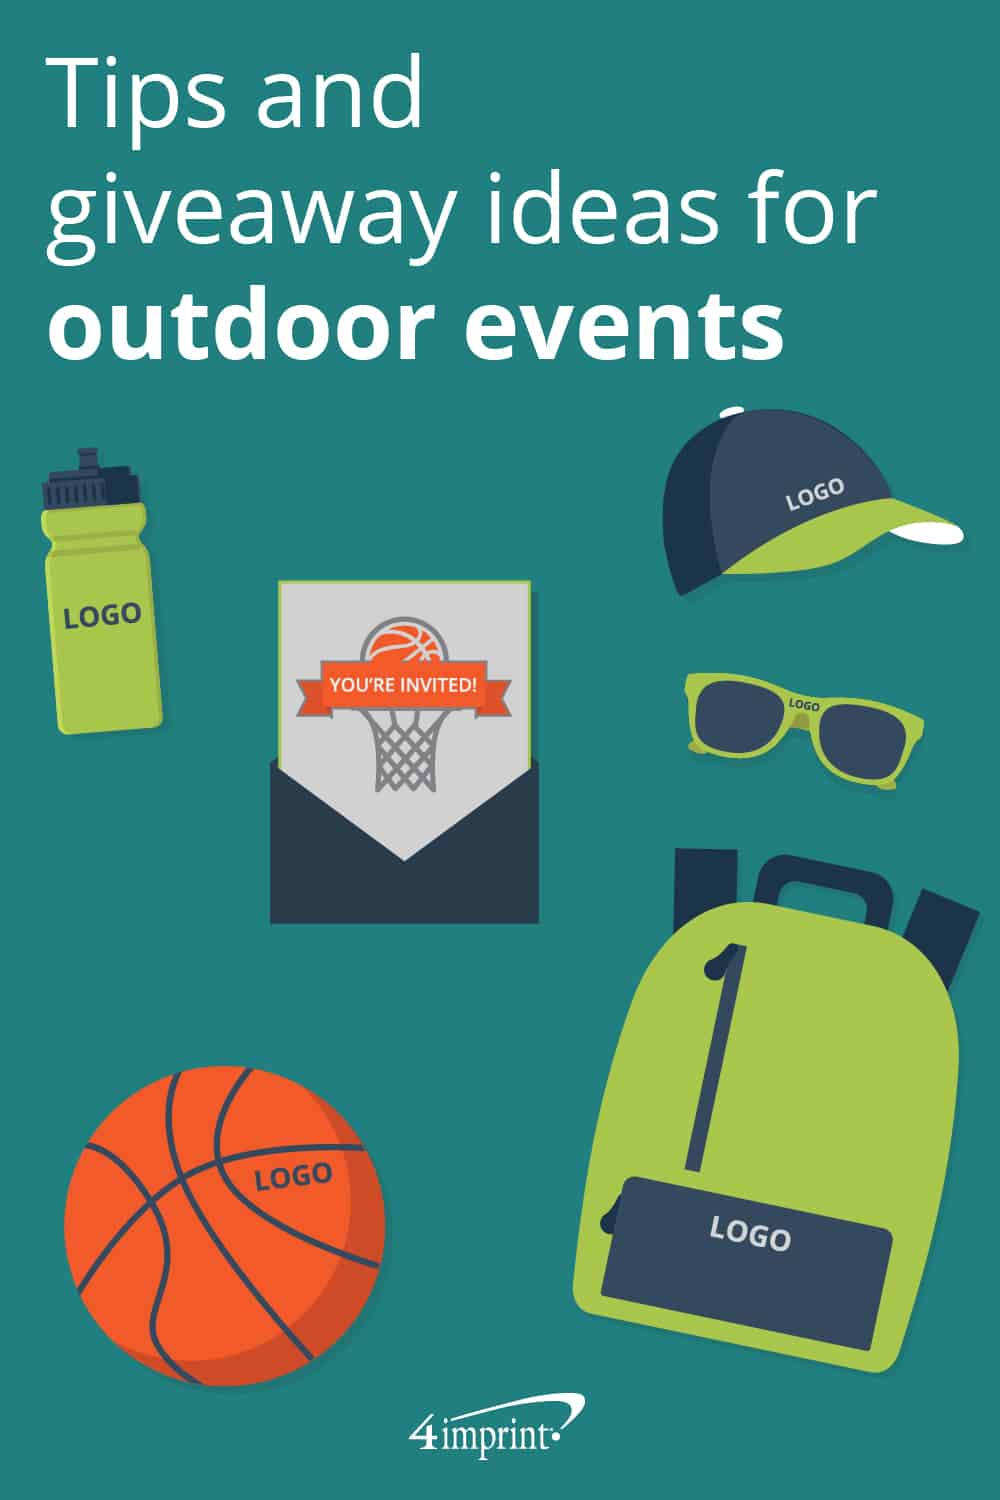 Tips and giveaway ideas for outdoor events 